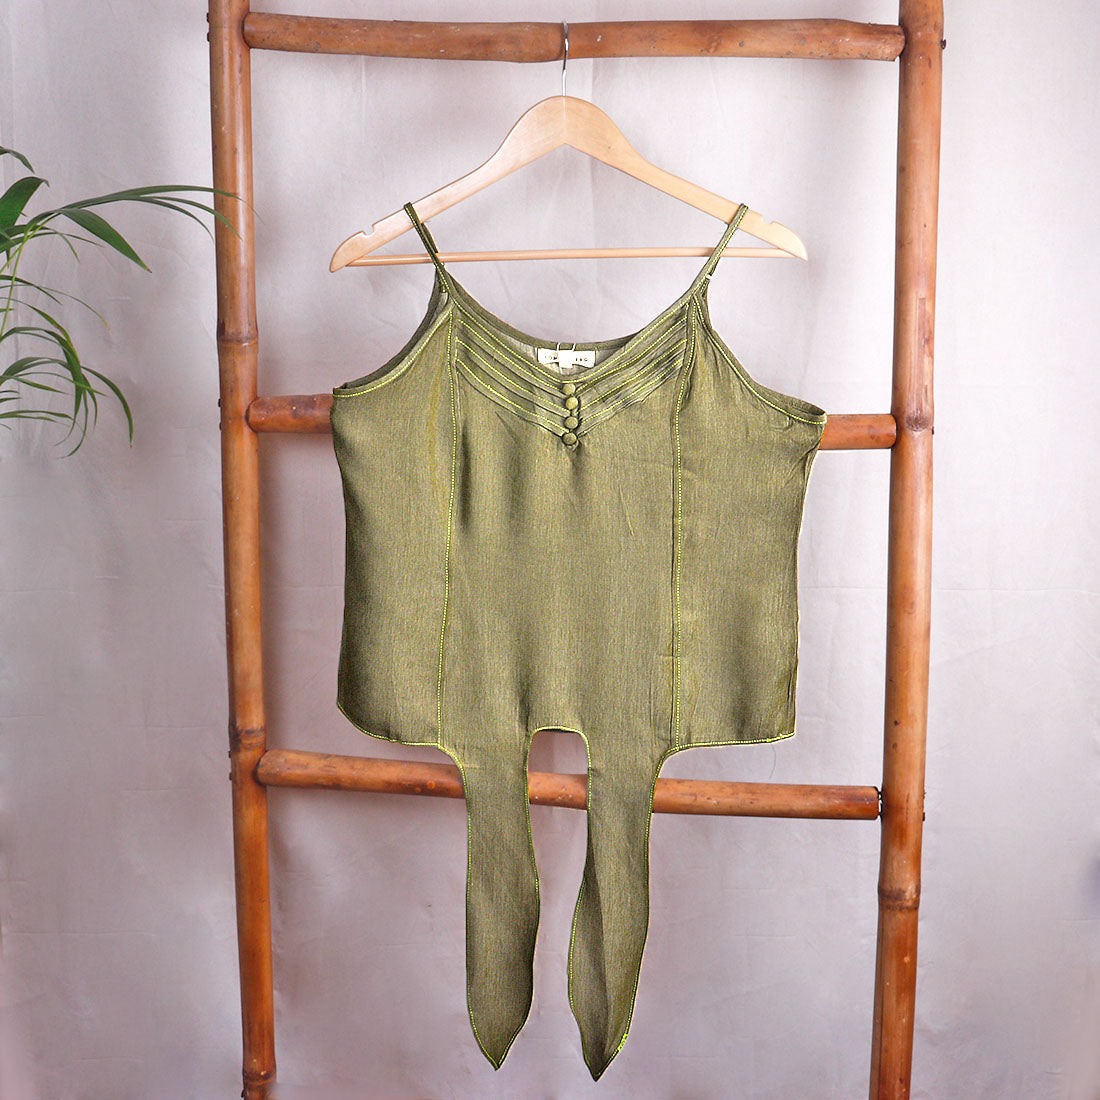 Latest Fashion Top for Women - Olive Green